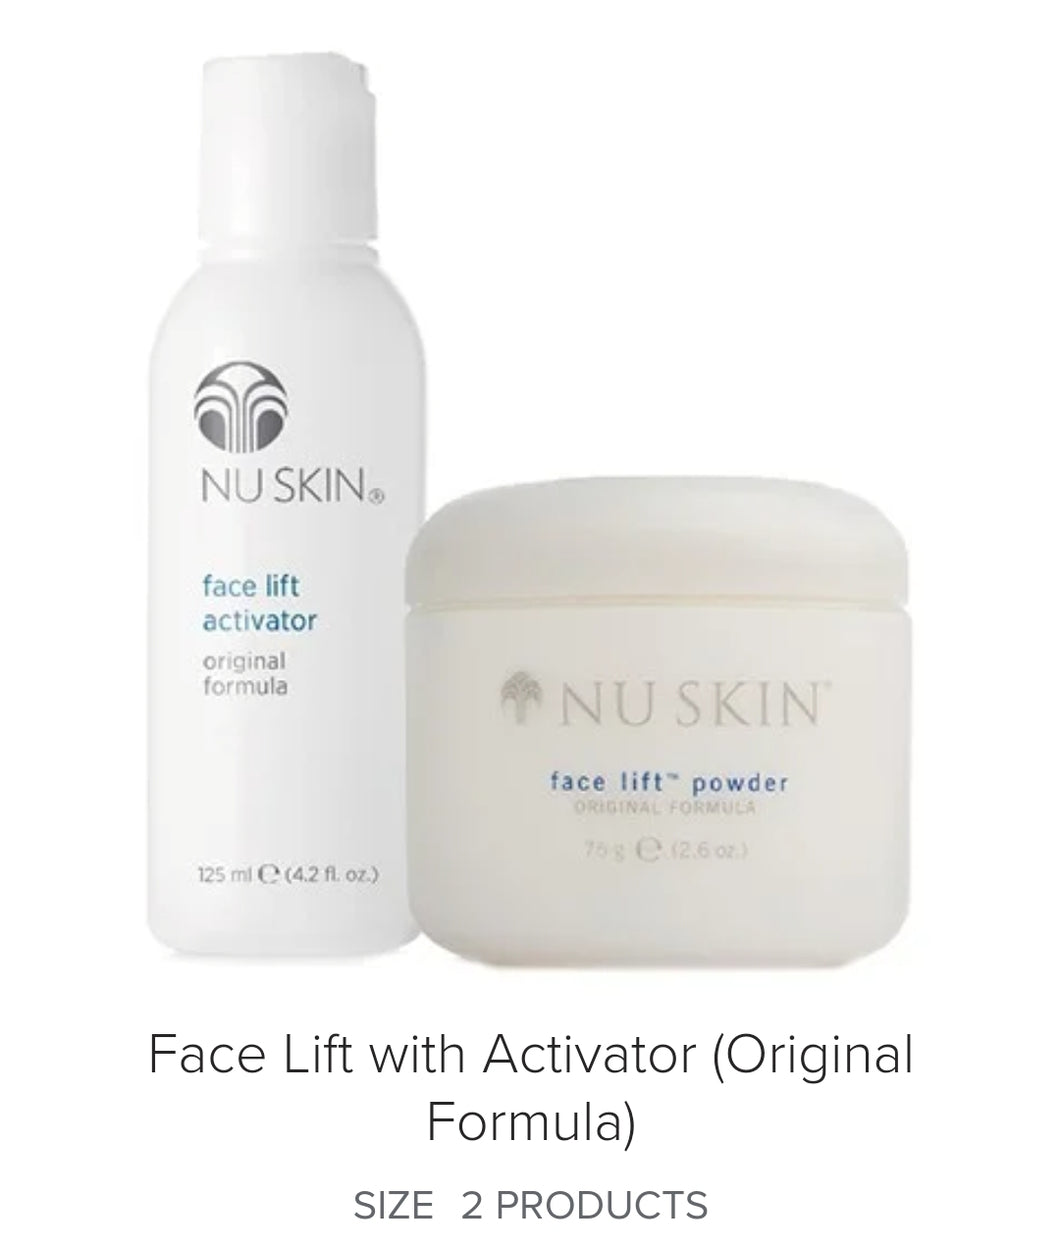 Face-lift with Activator